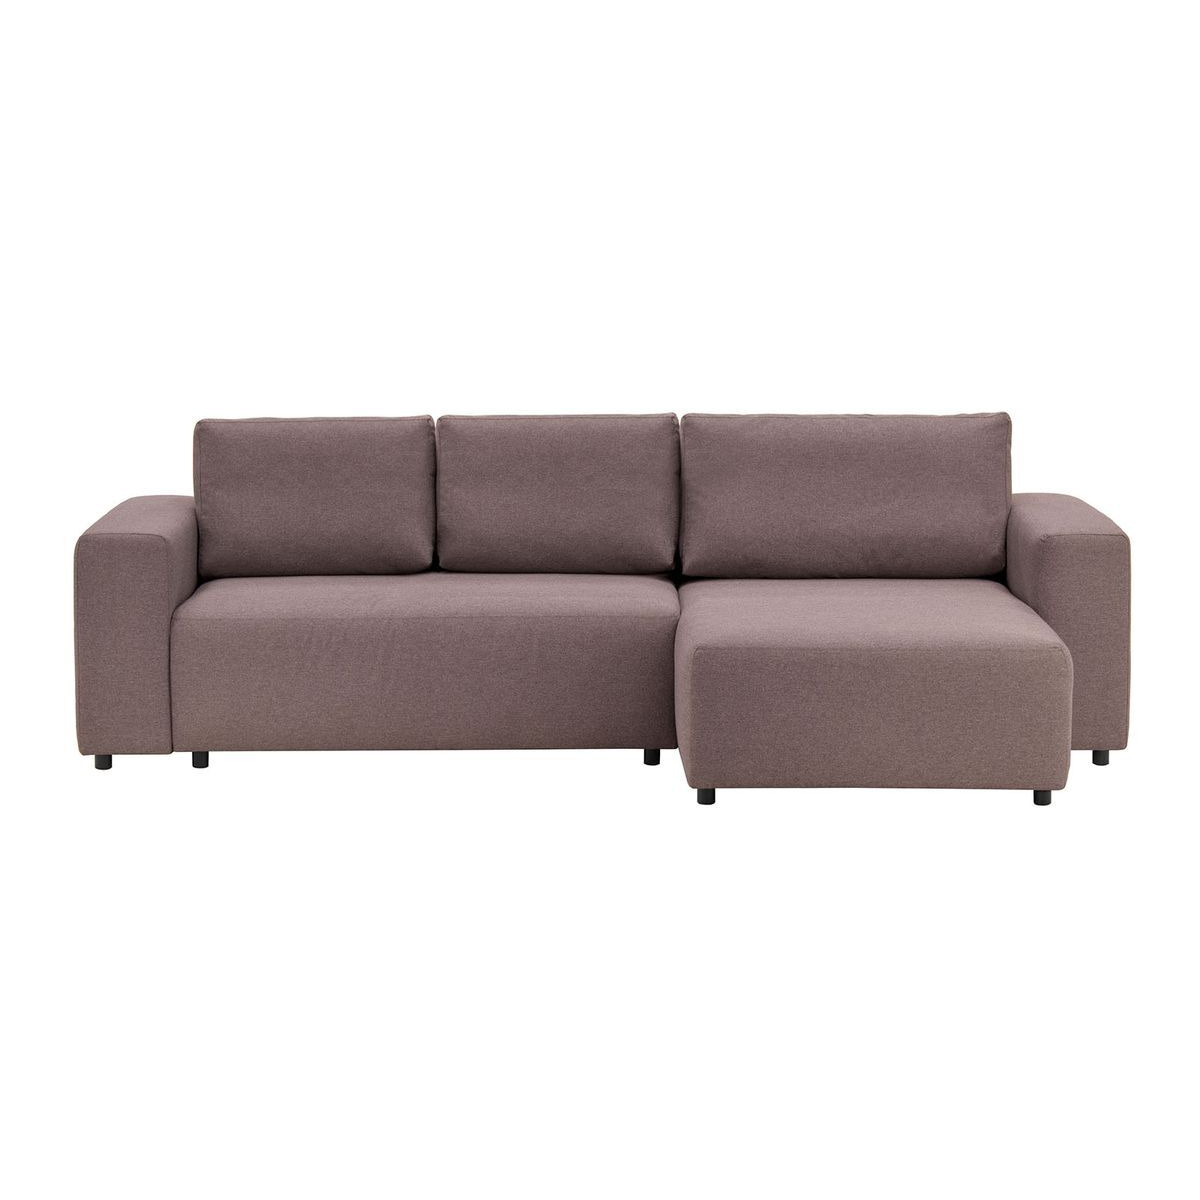 Solace Right Hand Corner Sofa Bed, grey - image 1